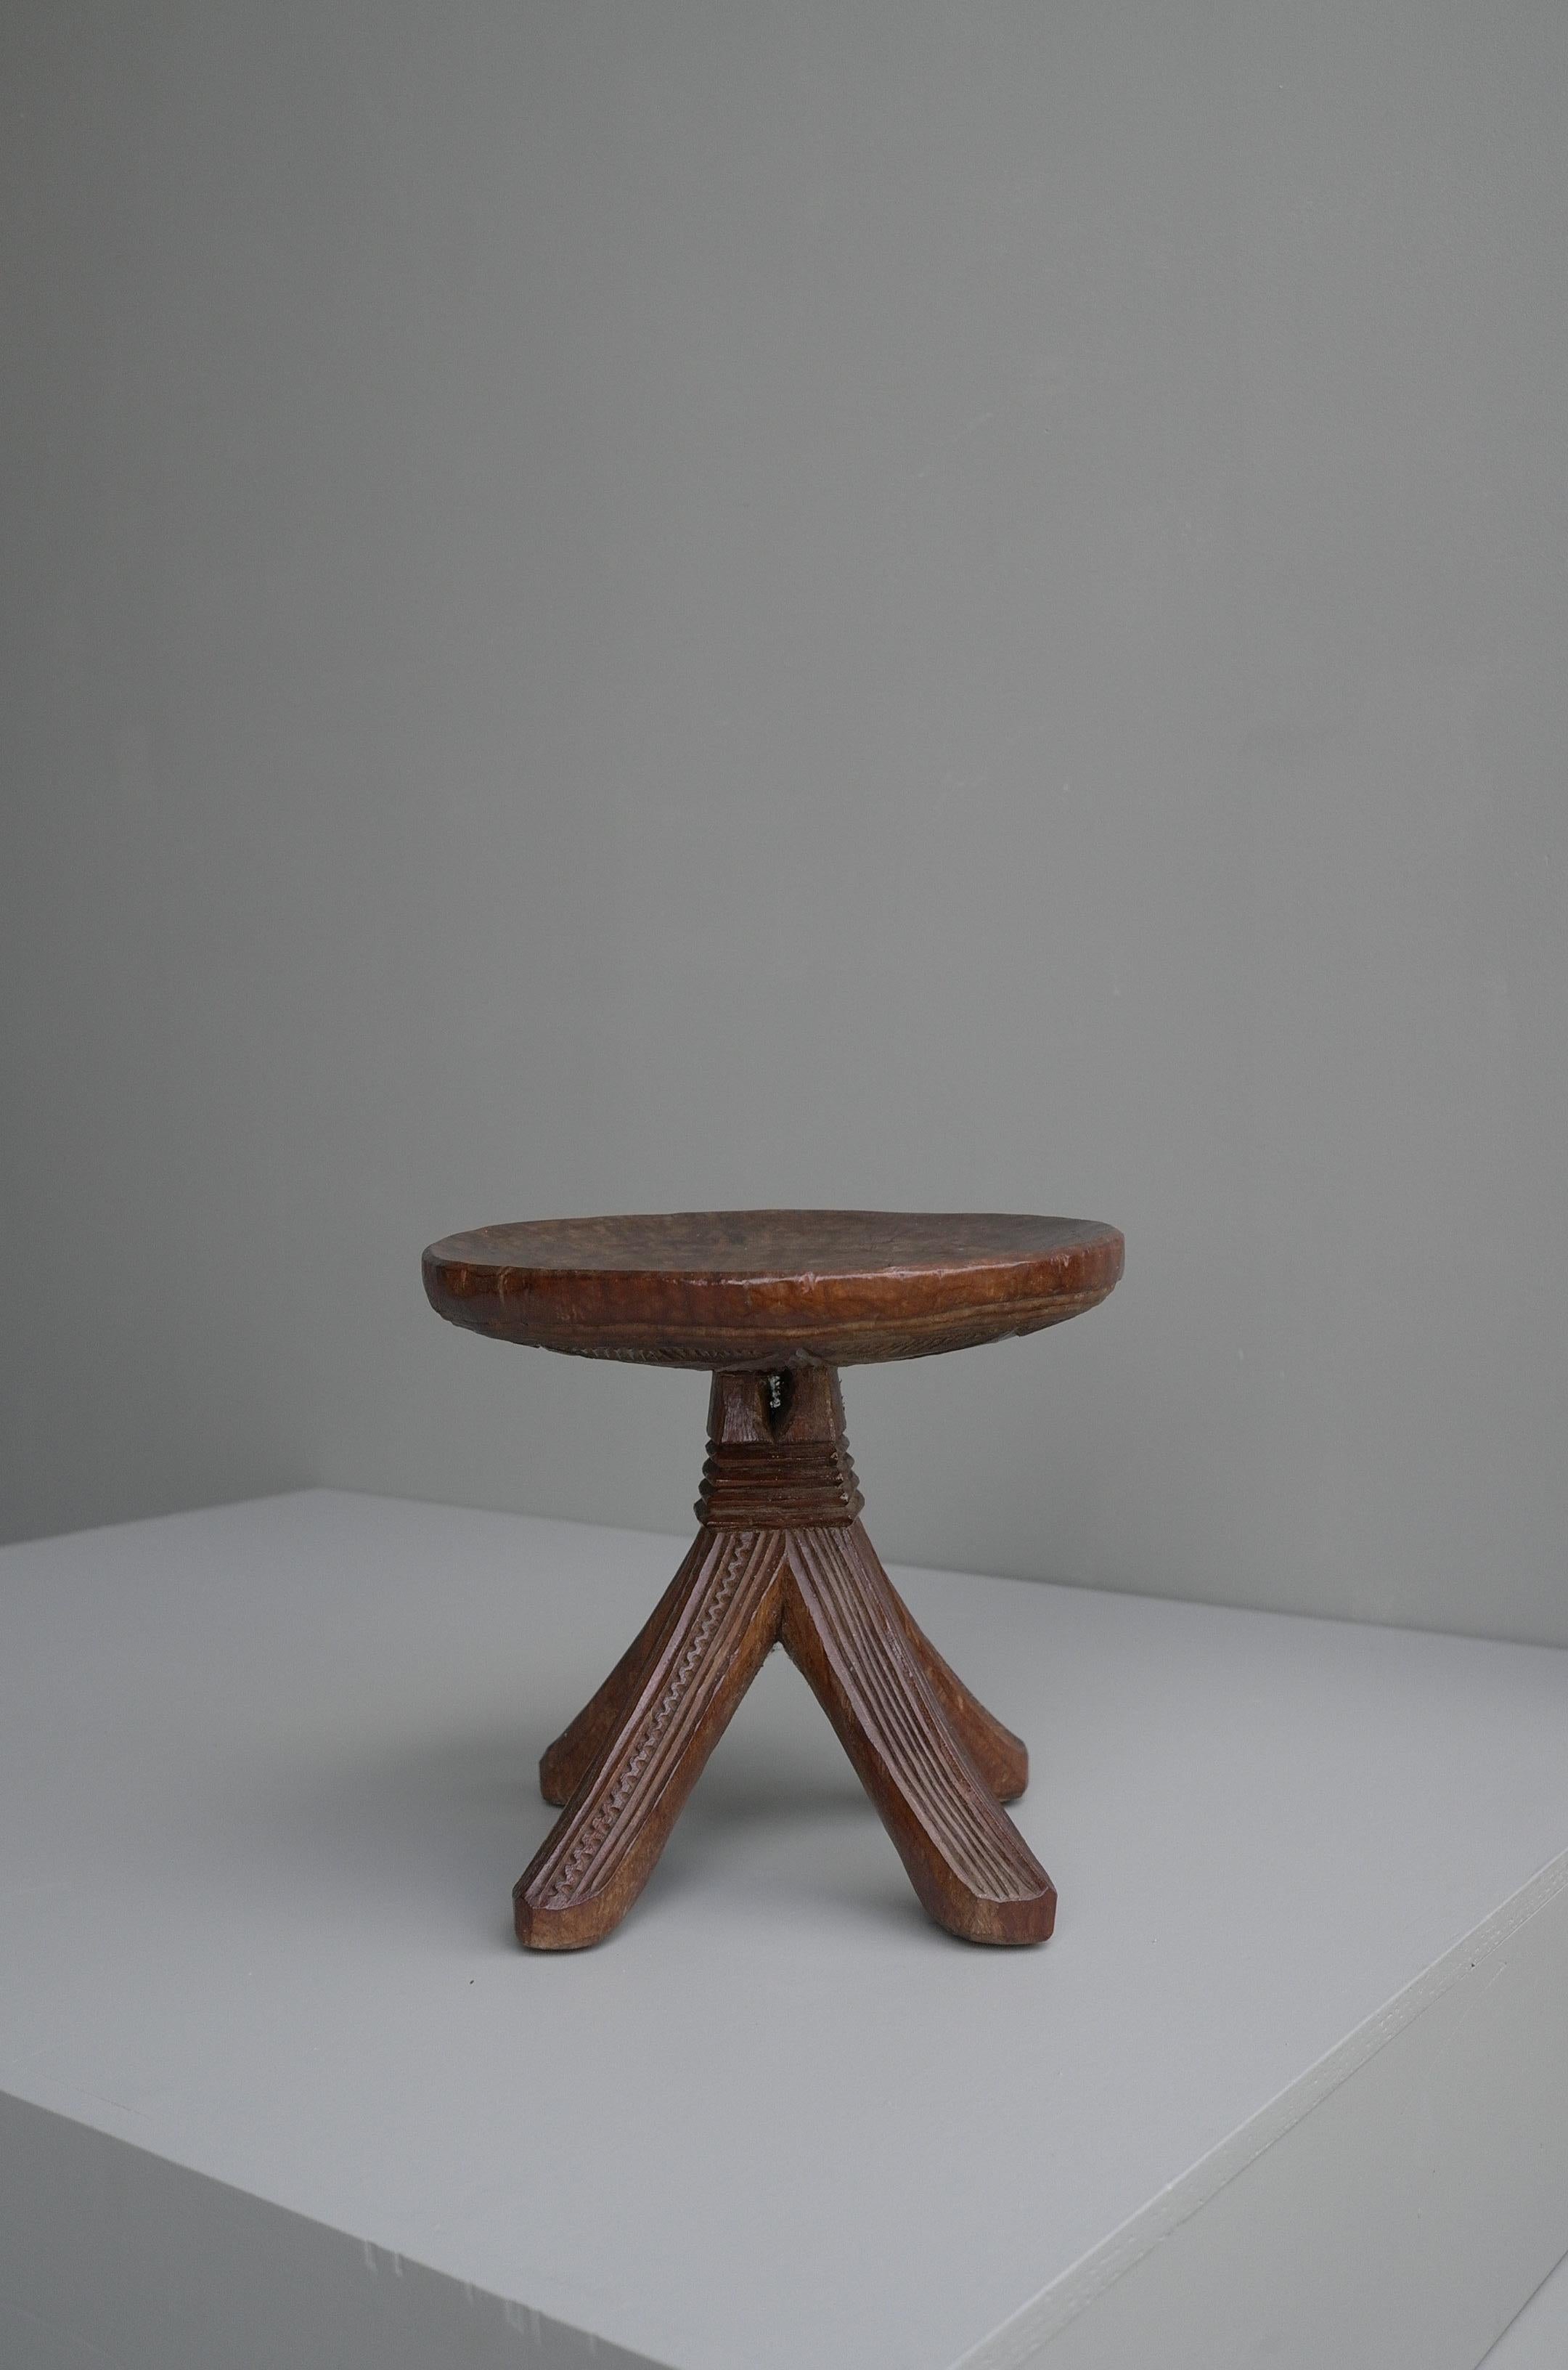 20th Century Handcrafted African Tribal Art Craftsmanship Stool, Mid-Century Modern, 1950's For Sale